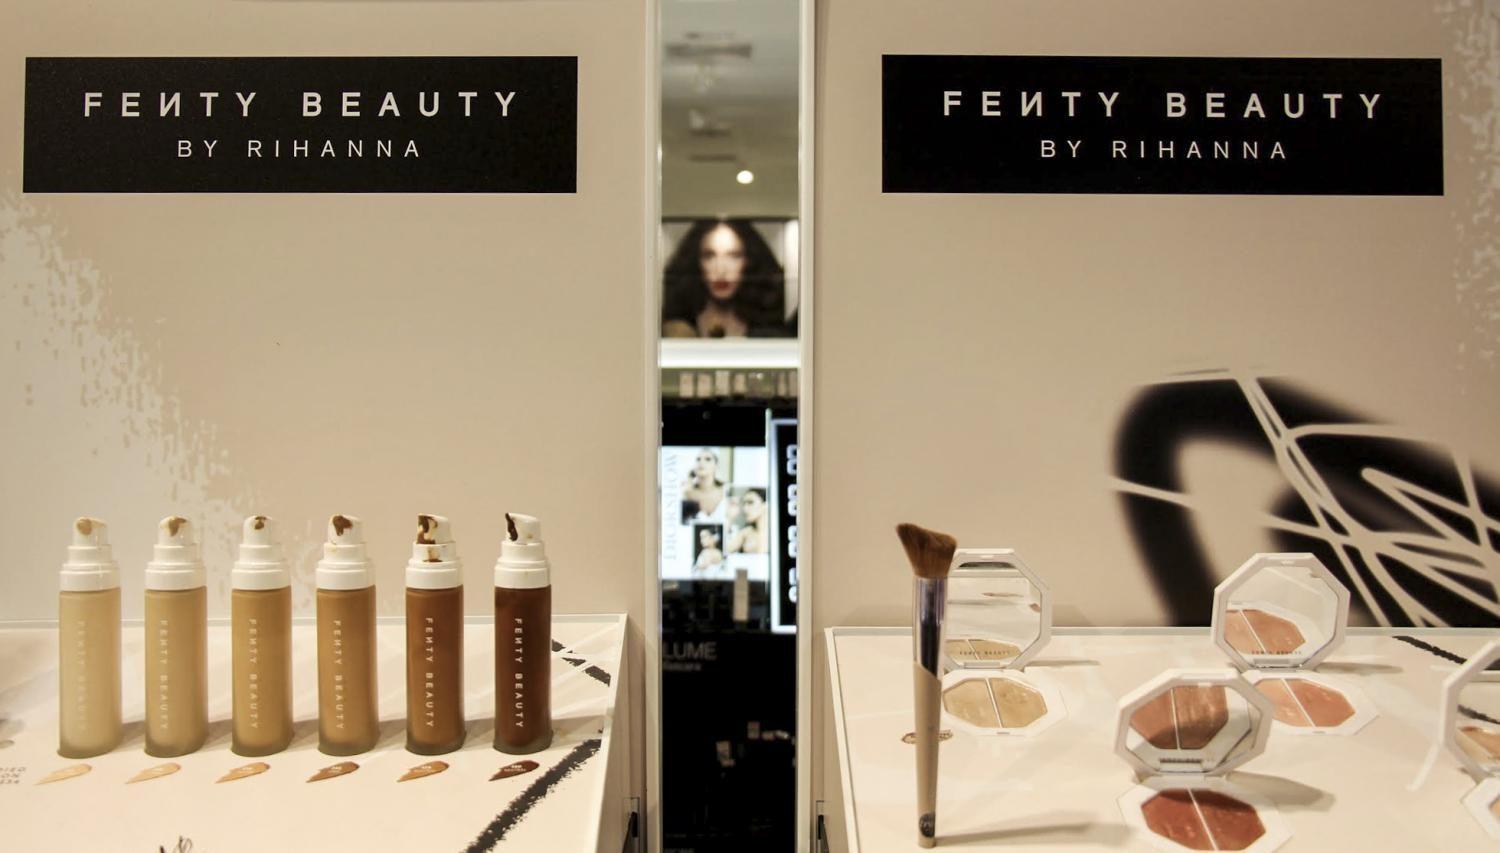 Rihannas makeup line Fenty carries a wide range of products for all skin colors.